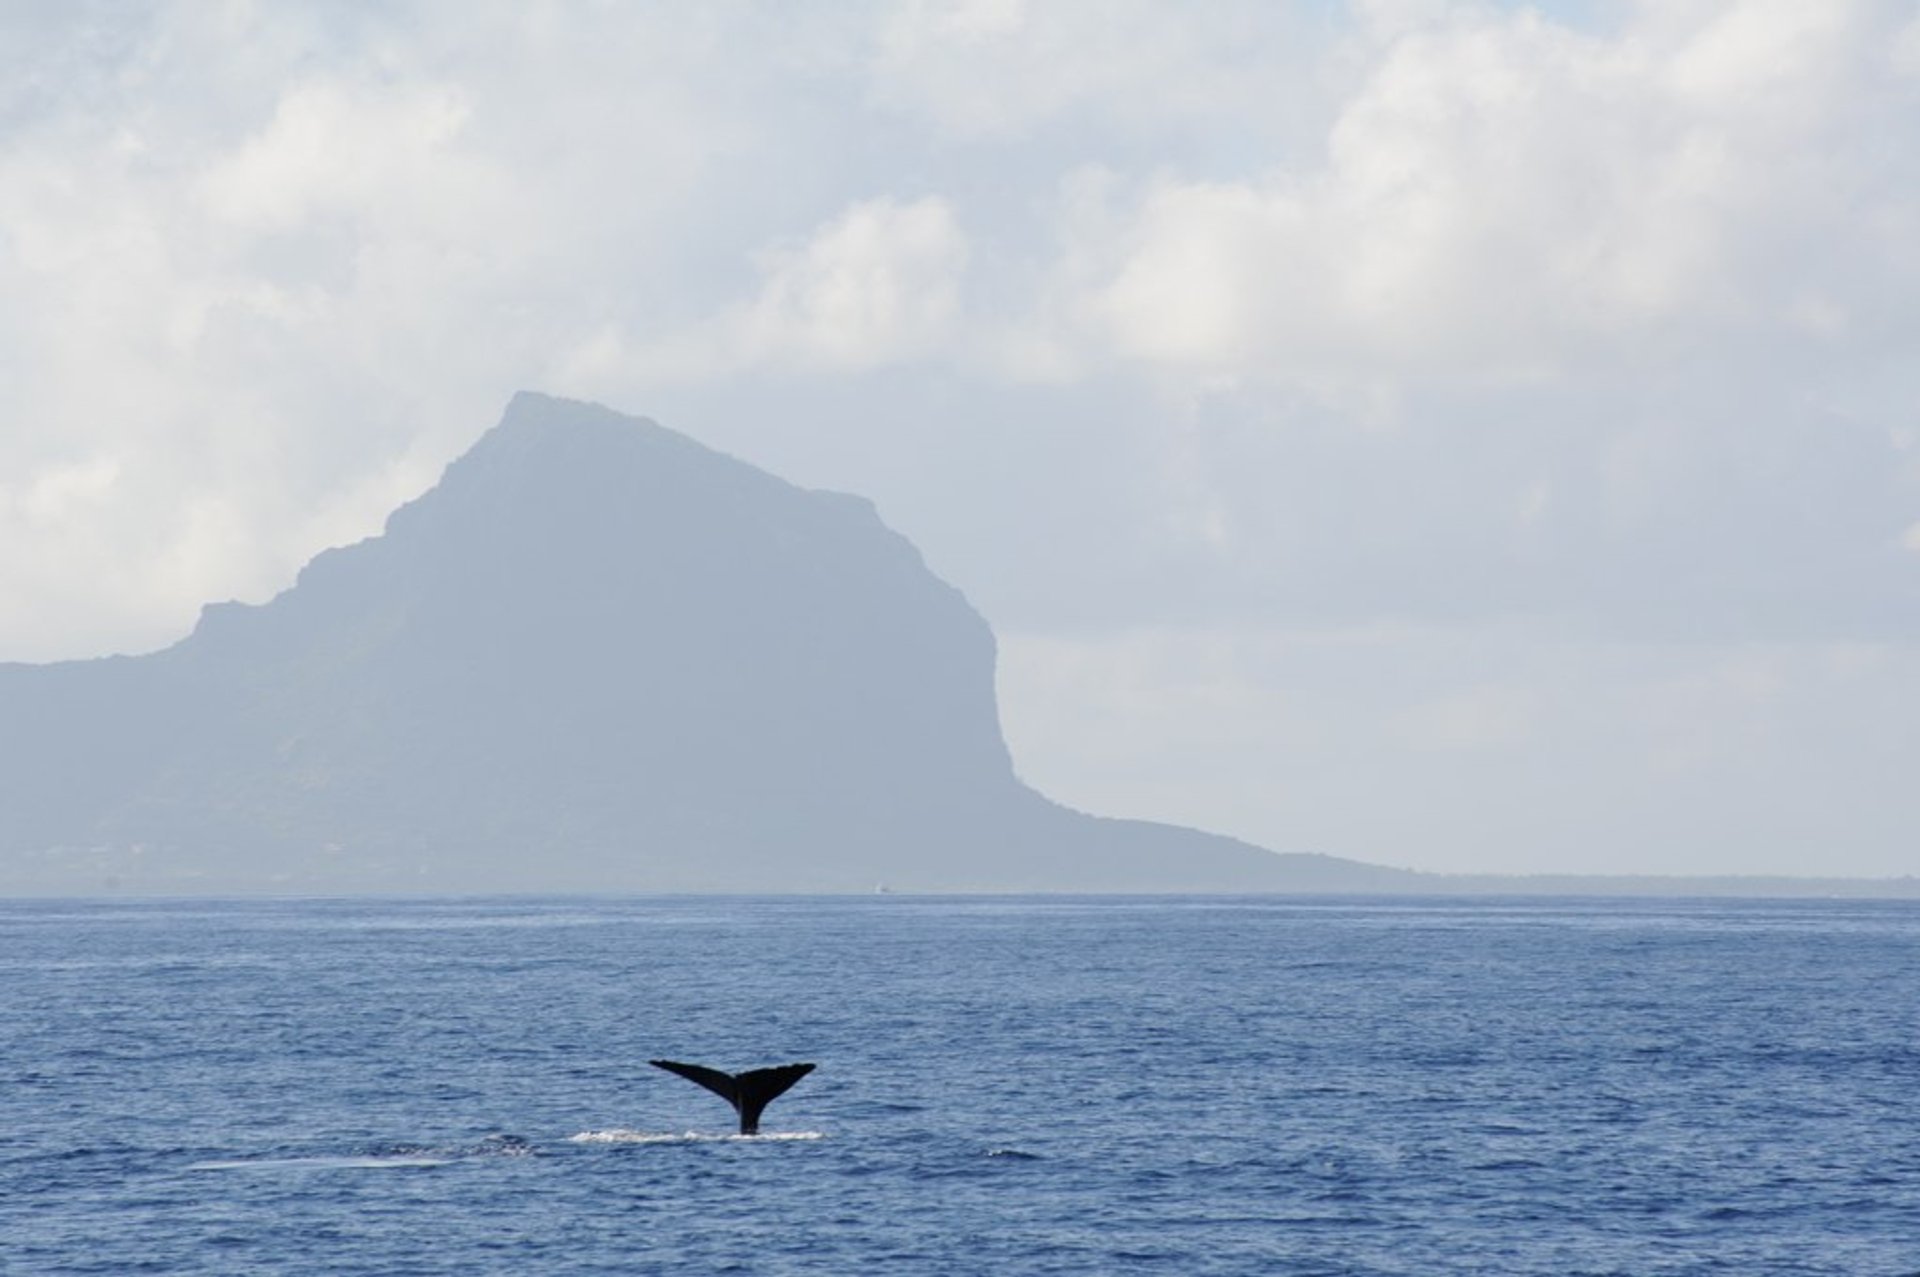 Whale Watching (Walbeobachtung)